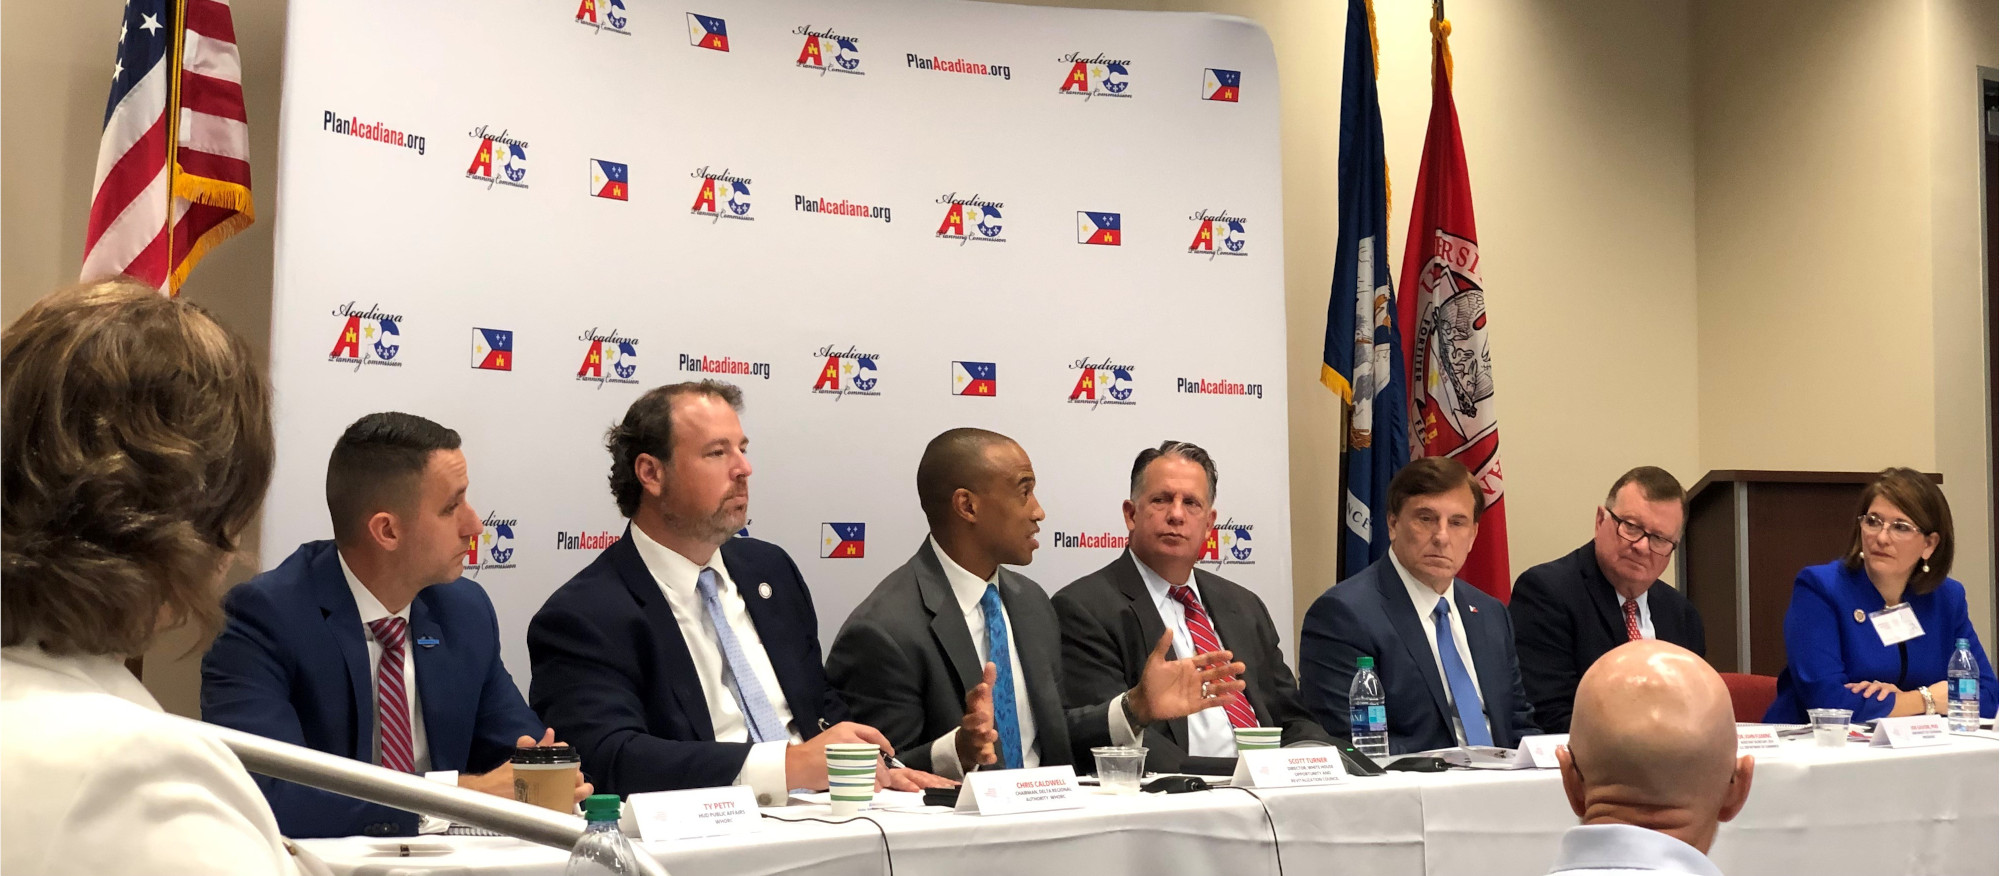 Executive Director Turner, Assistant Secretary Fleming, and Delta Regional Authority Federal Co-Chairman Chris Caldwell lead a discussion of economic development in Opportunity Zones in Louisiana